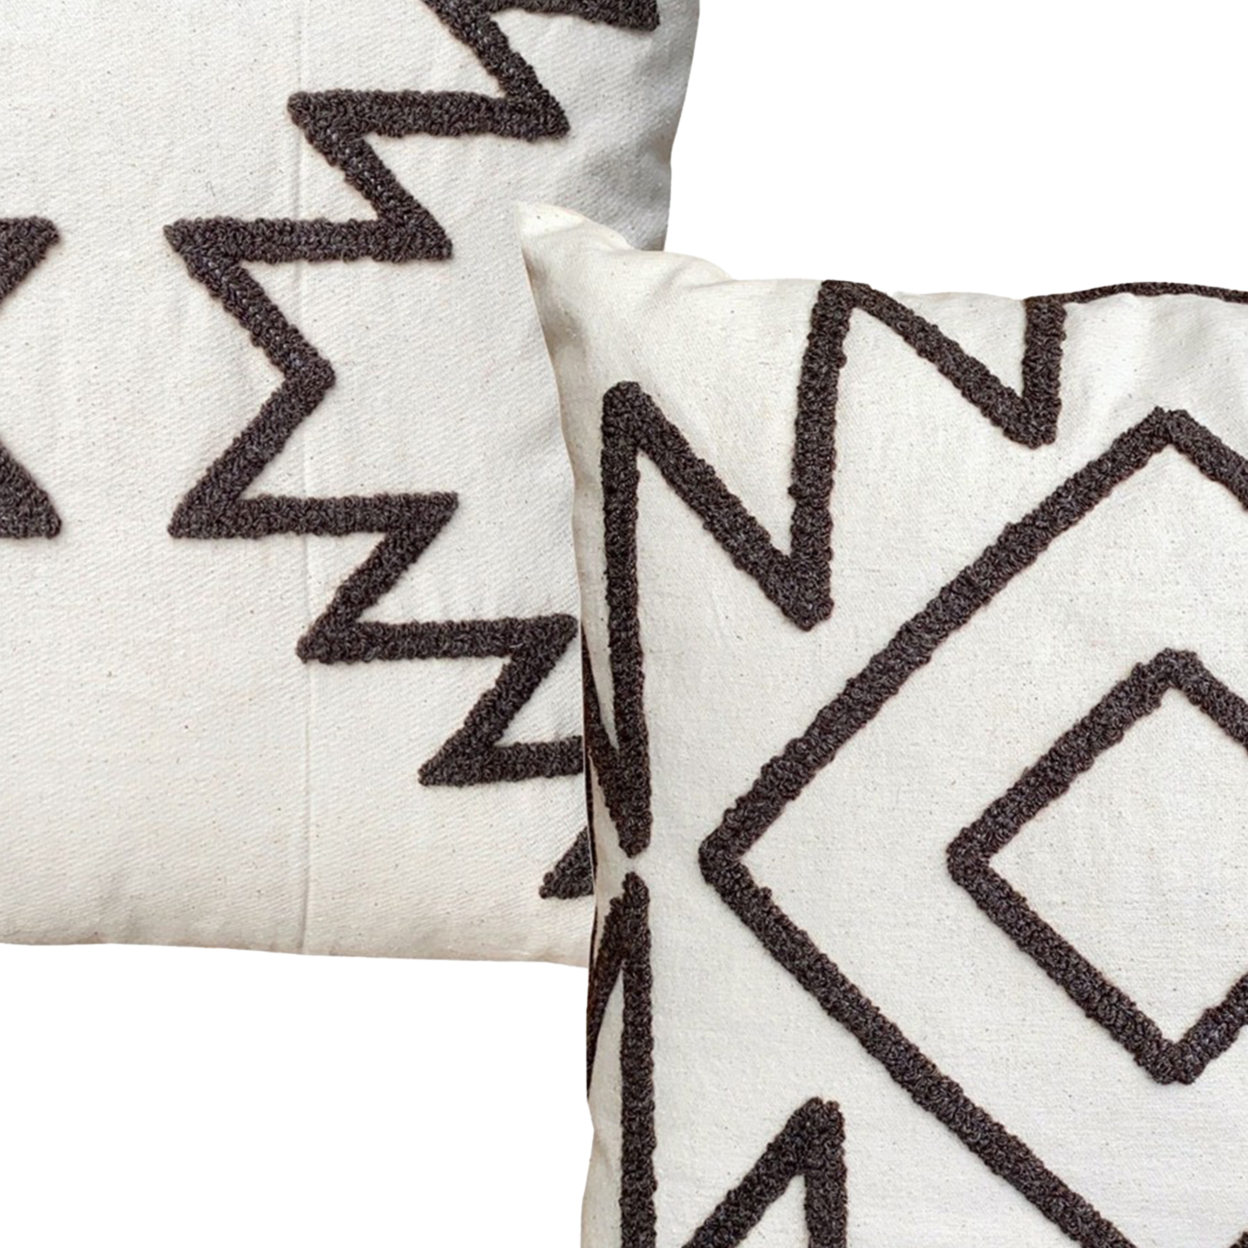 17 x 17 Inch Square Cotton Accent Throw Pillows Geometric Aztec Embroidery Set of 2 White Gray - Saltoro Sherpi - image 4 of 7